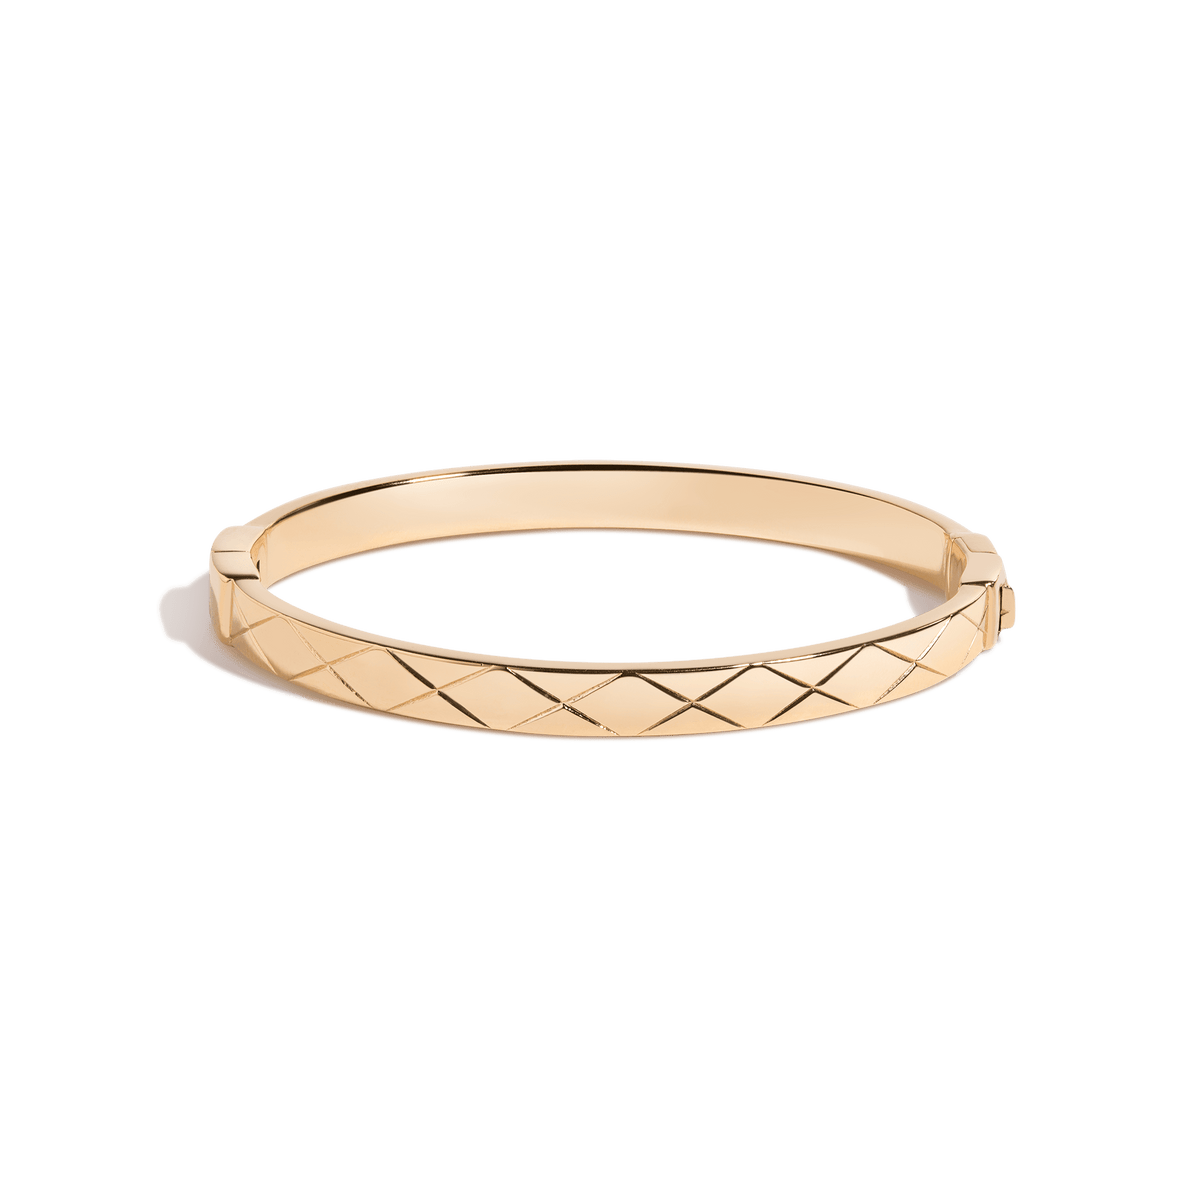 Aurate New York Classic Gold Hinged Bracelet, Vermeil Rose Gold, Size Small/Medium